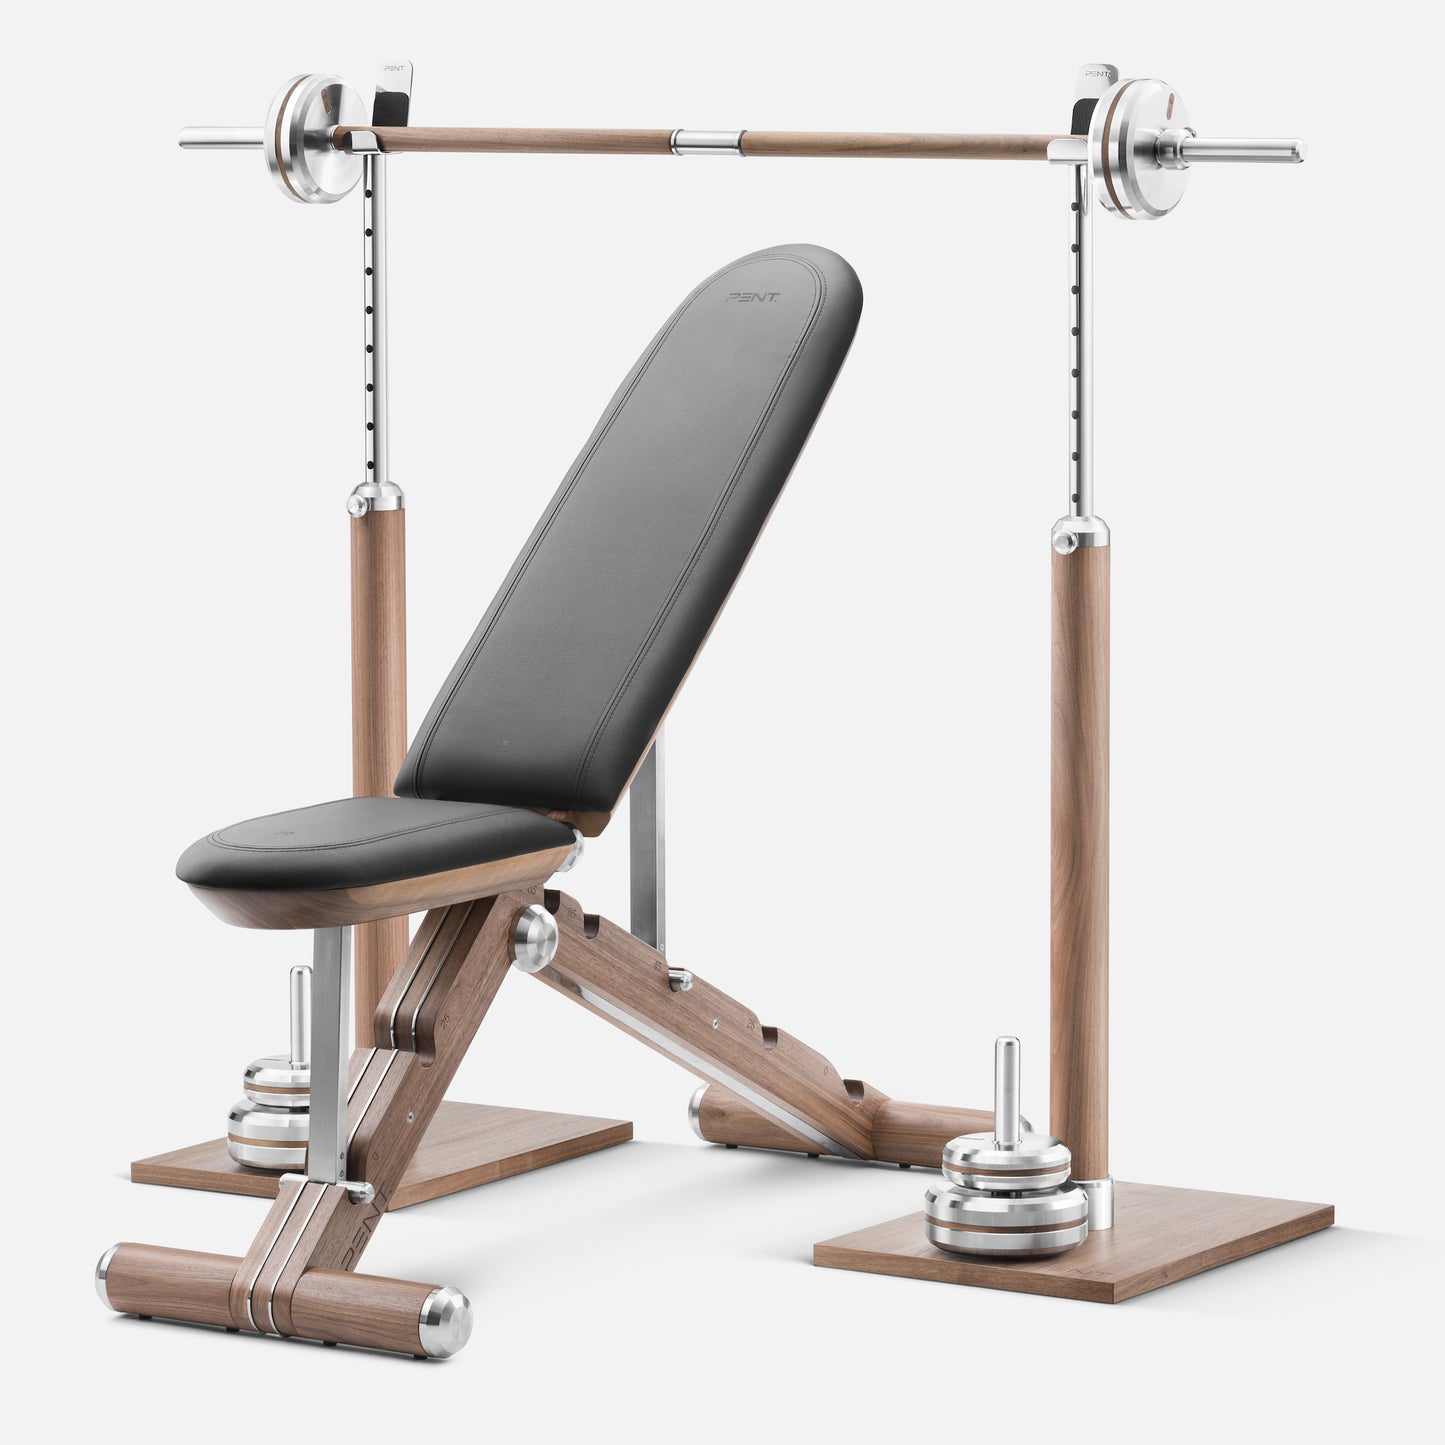 Luxury Fitness Equipment. PENT BYSTRA. Customizable luxury bench press set. Cycling Bears 